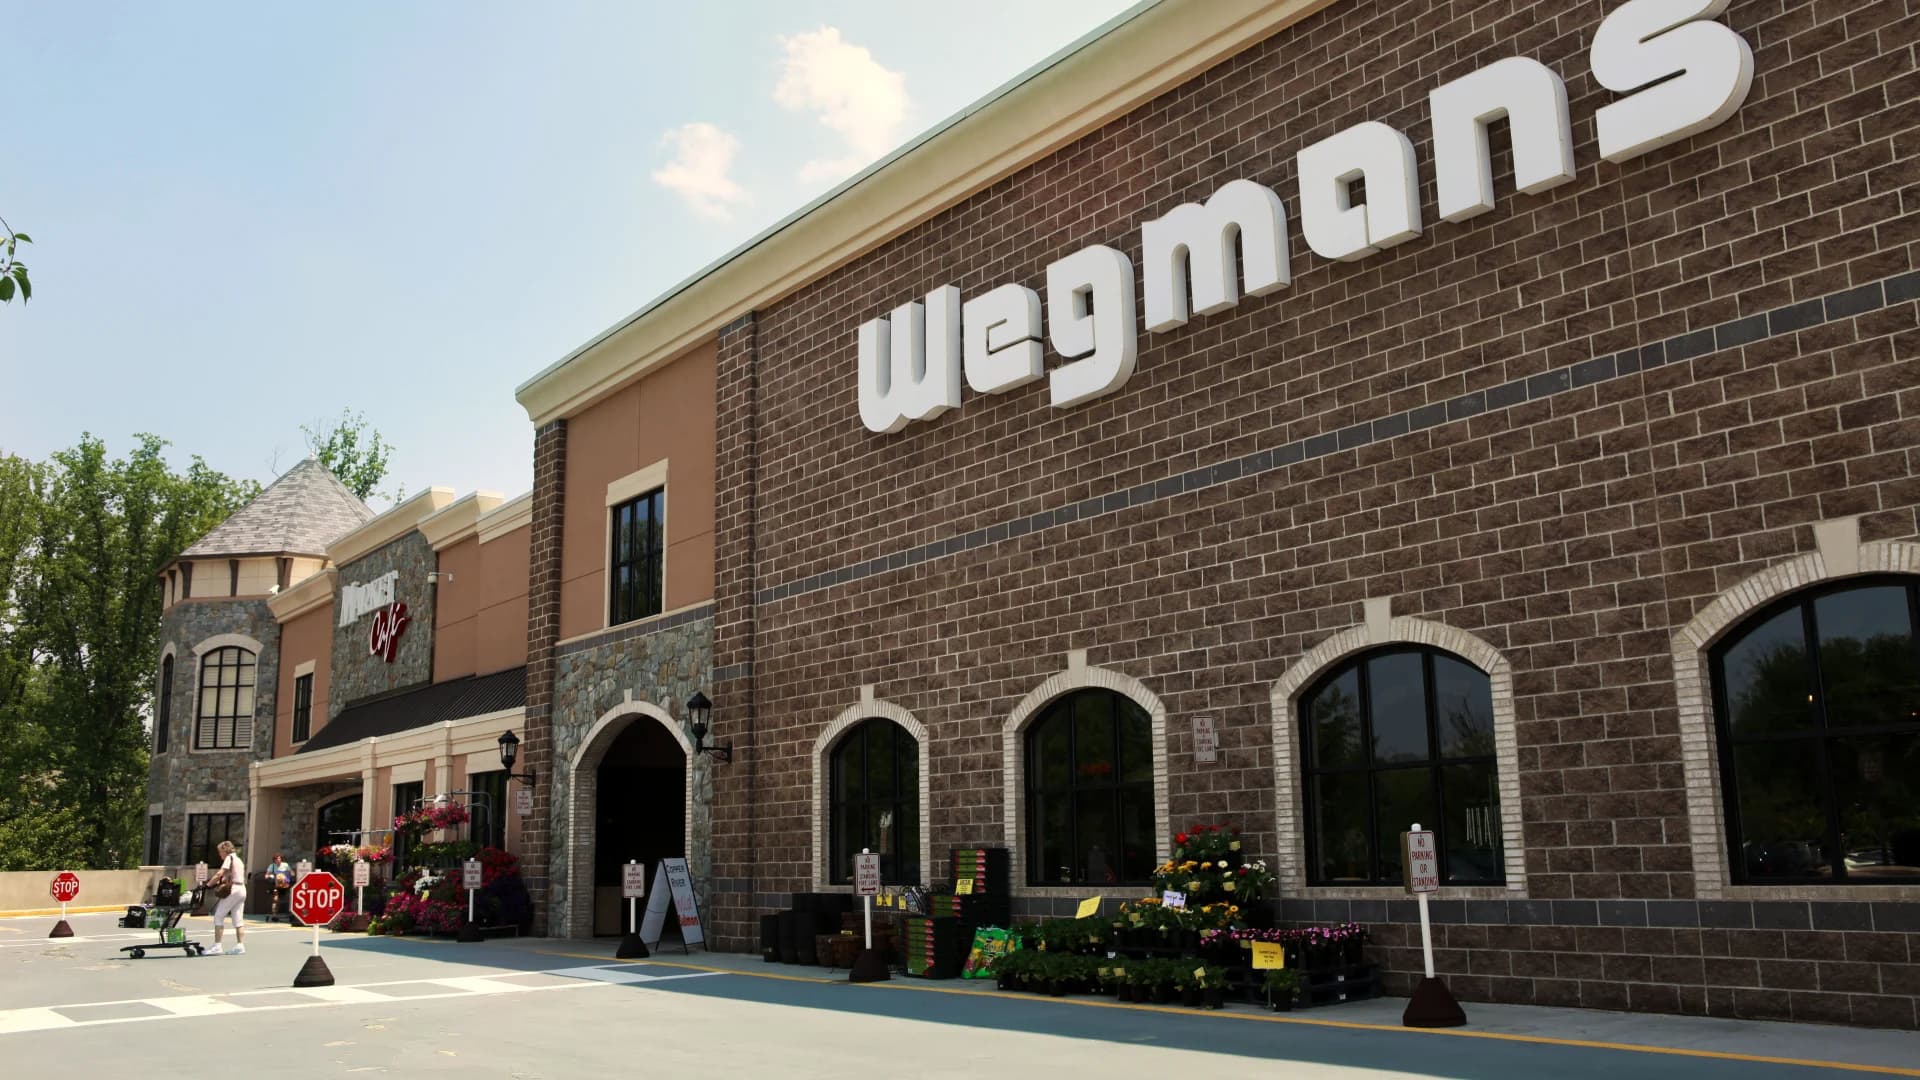 Attention Shoppers: Wegmans says customer personal information may have been compromised